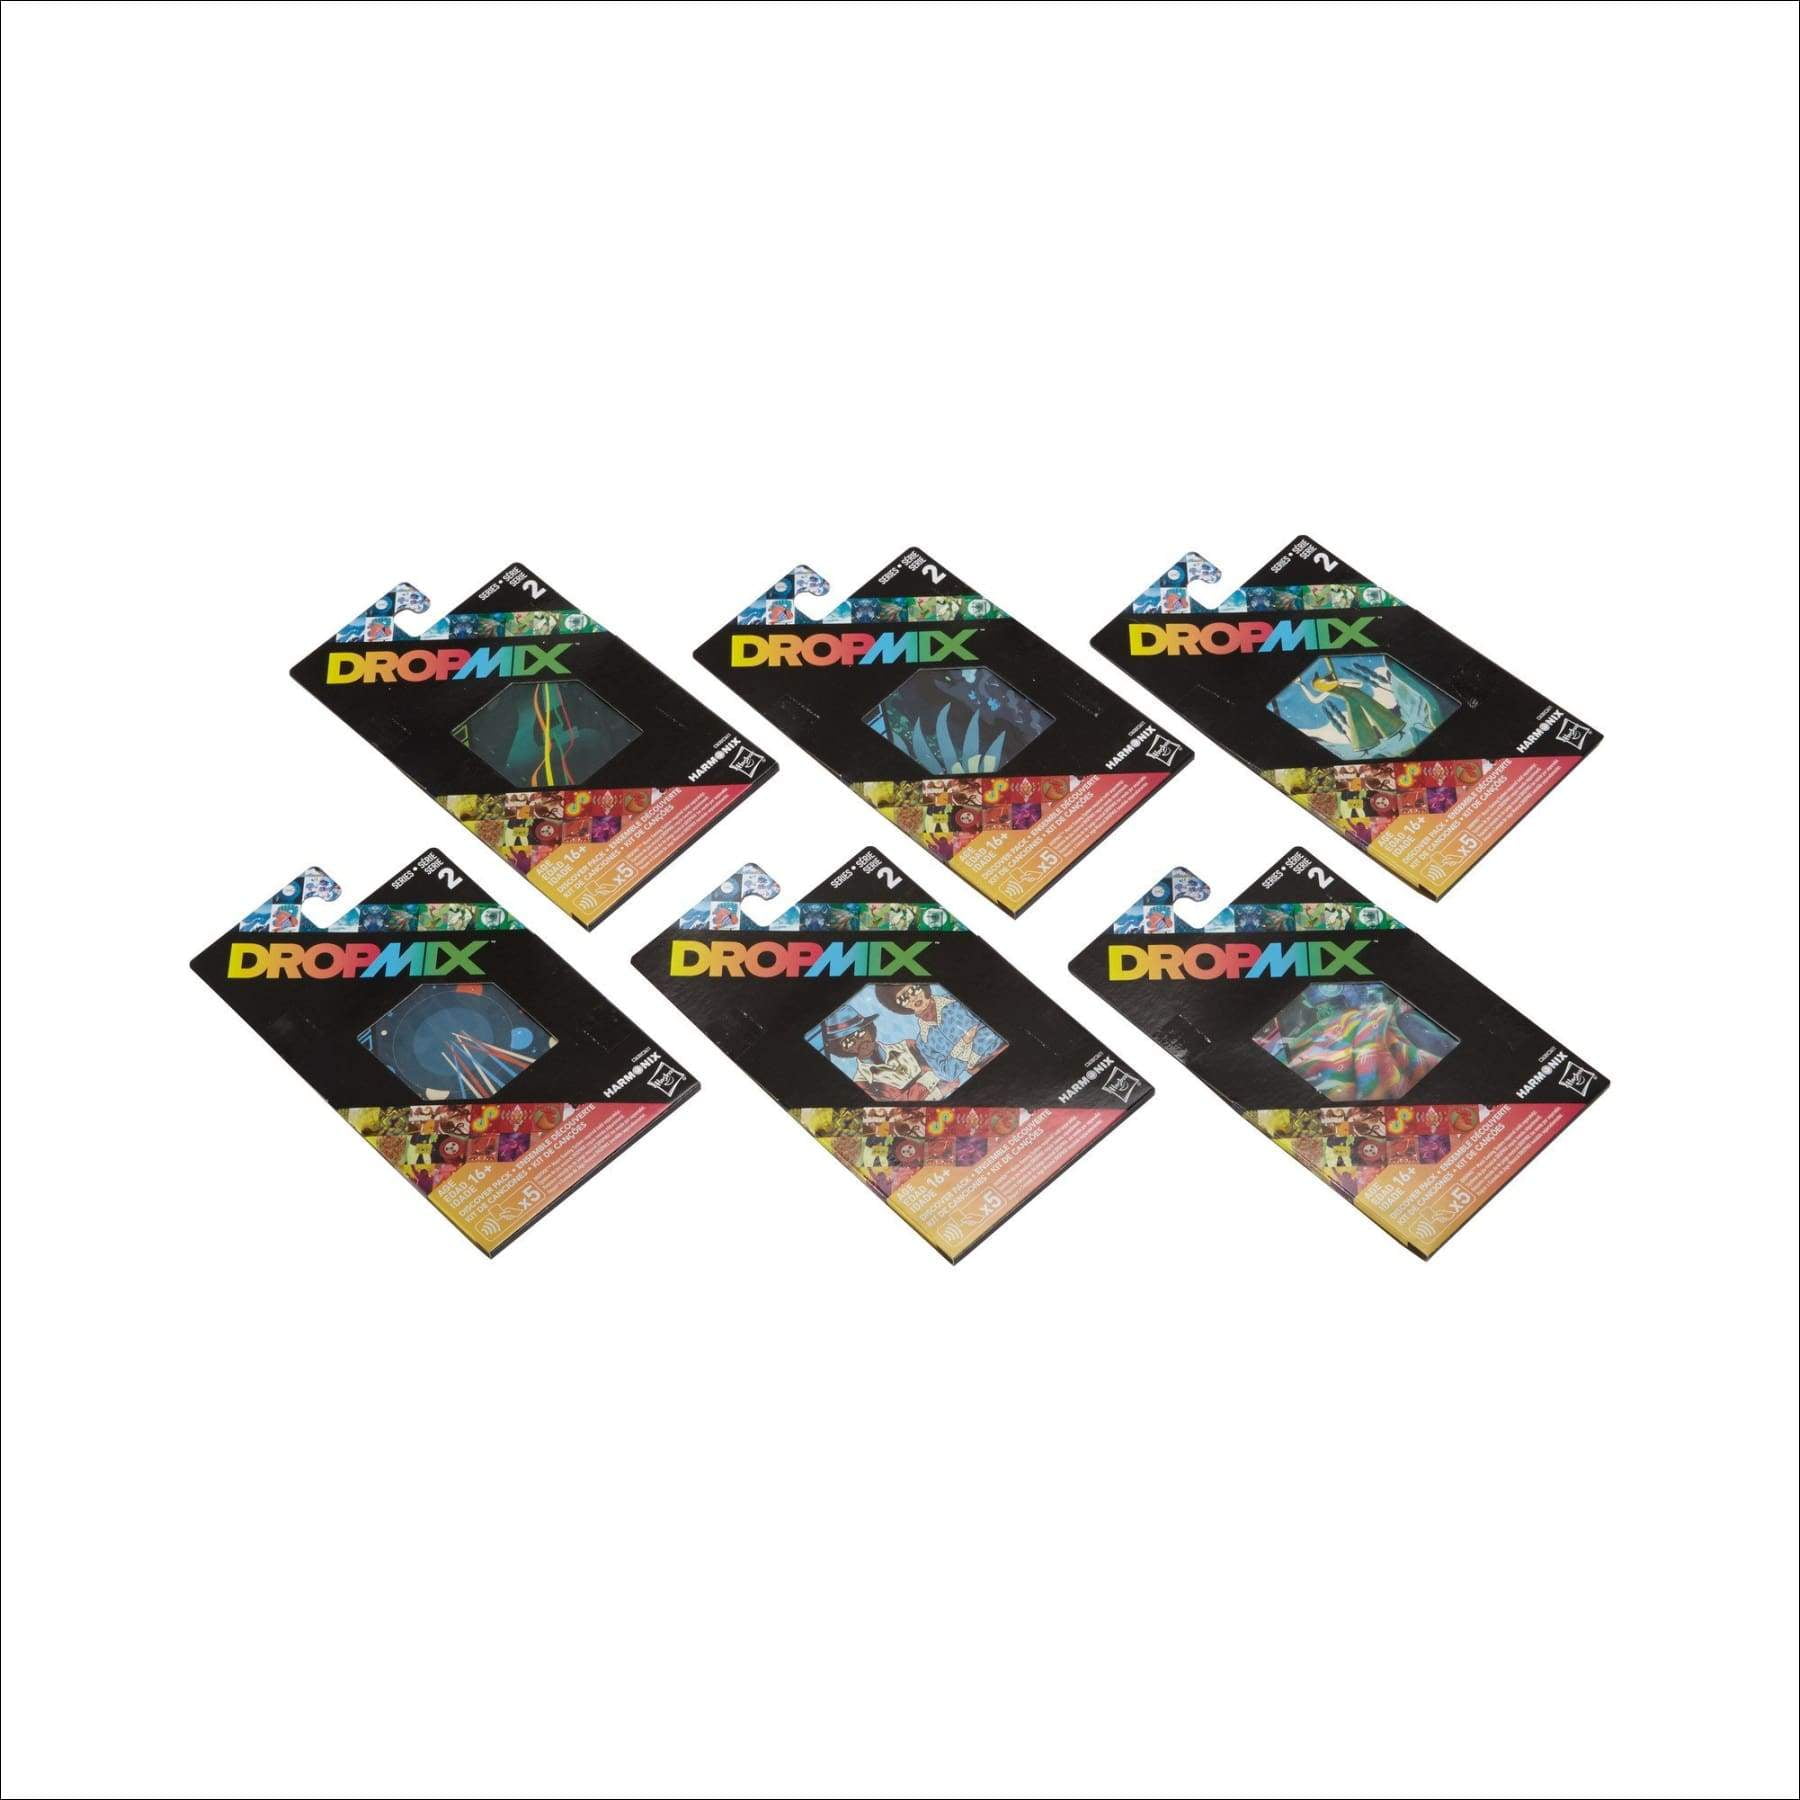 Hasbro Gaming DMX Dropmix Discover Pack Series 2 Electronic Game of 30 for sale online 